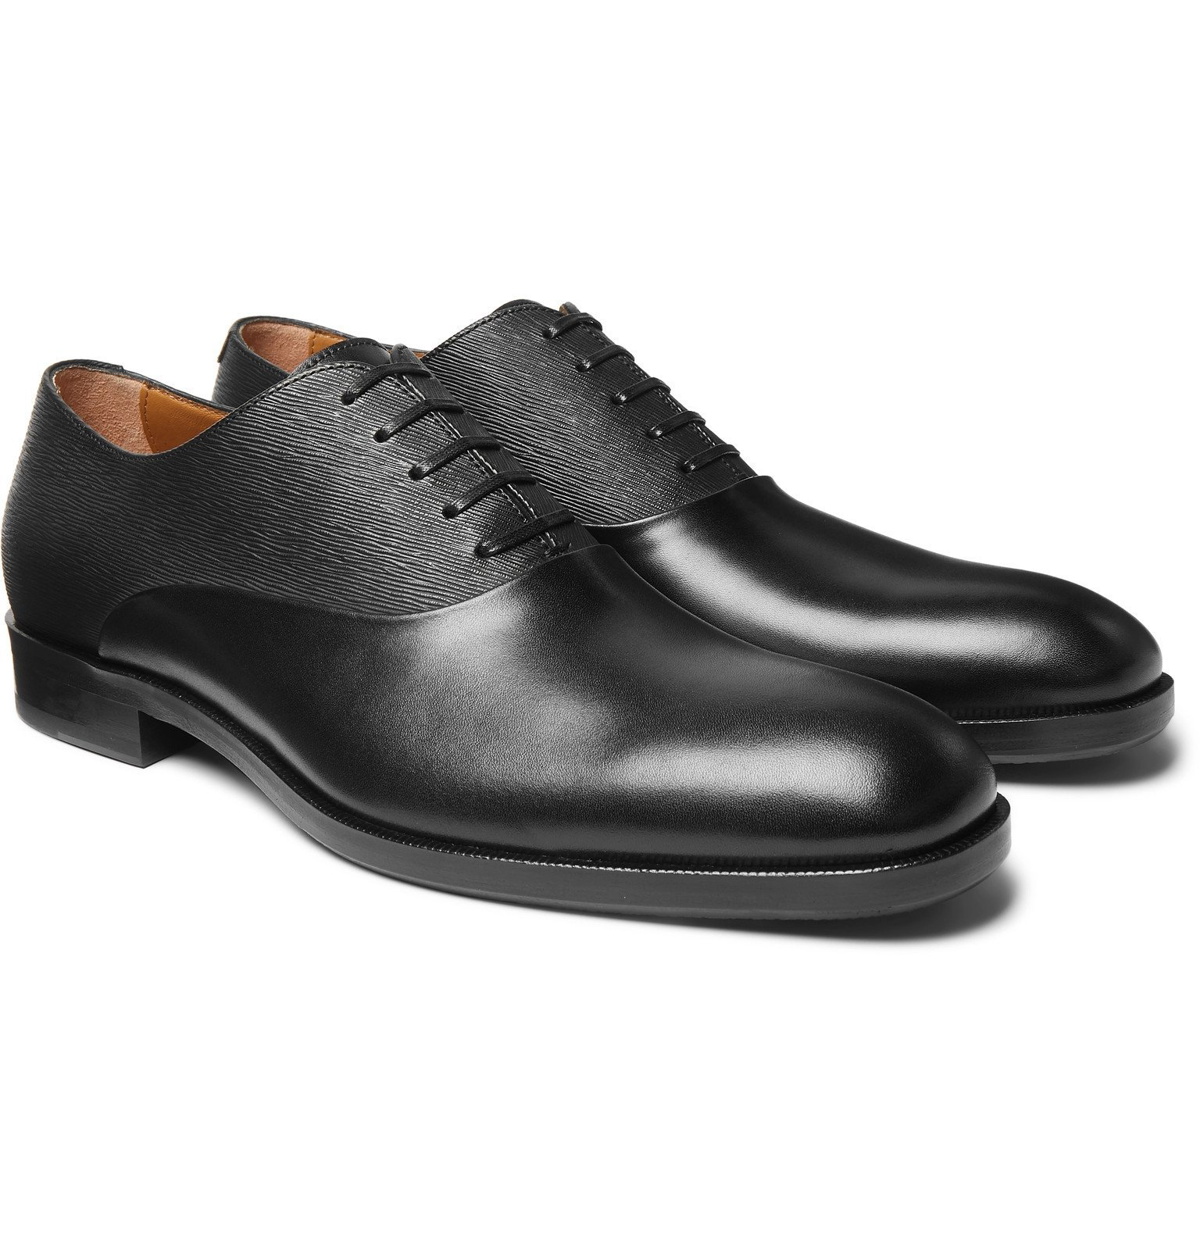 Boss - Stanford Smooth and Textured-Leather Oxford Shoes - Black Hugo Boss